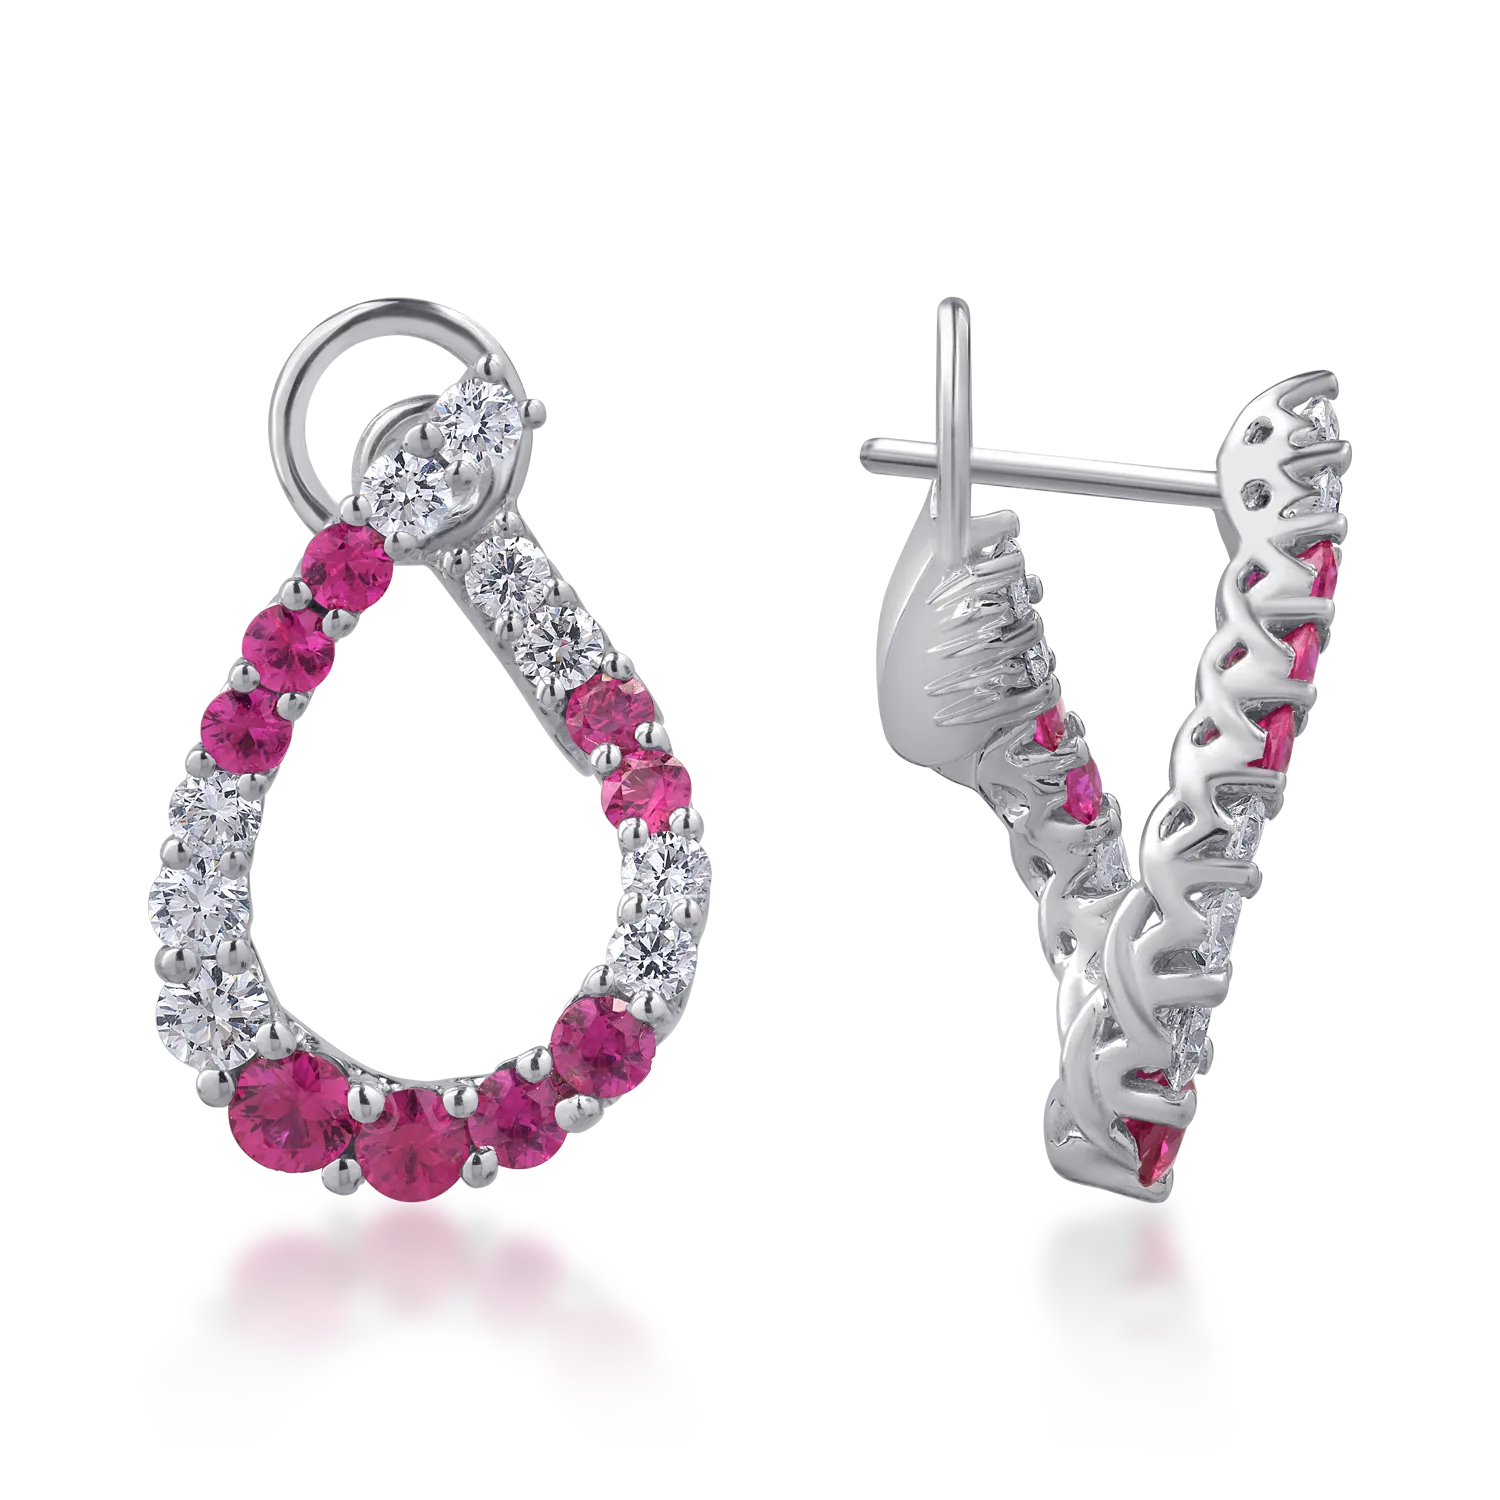 18K white gold earrings with 1.55ct rubies and 1.09ct diamonds